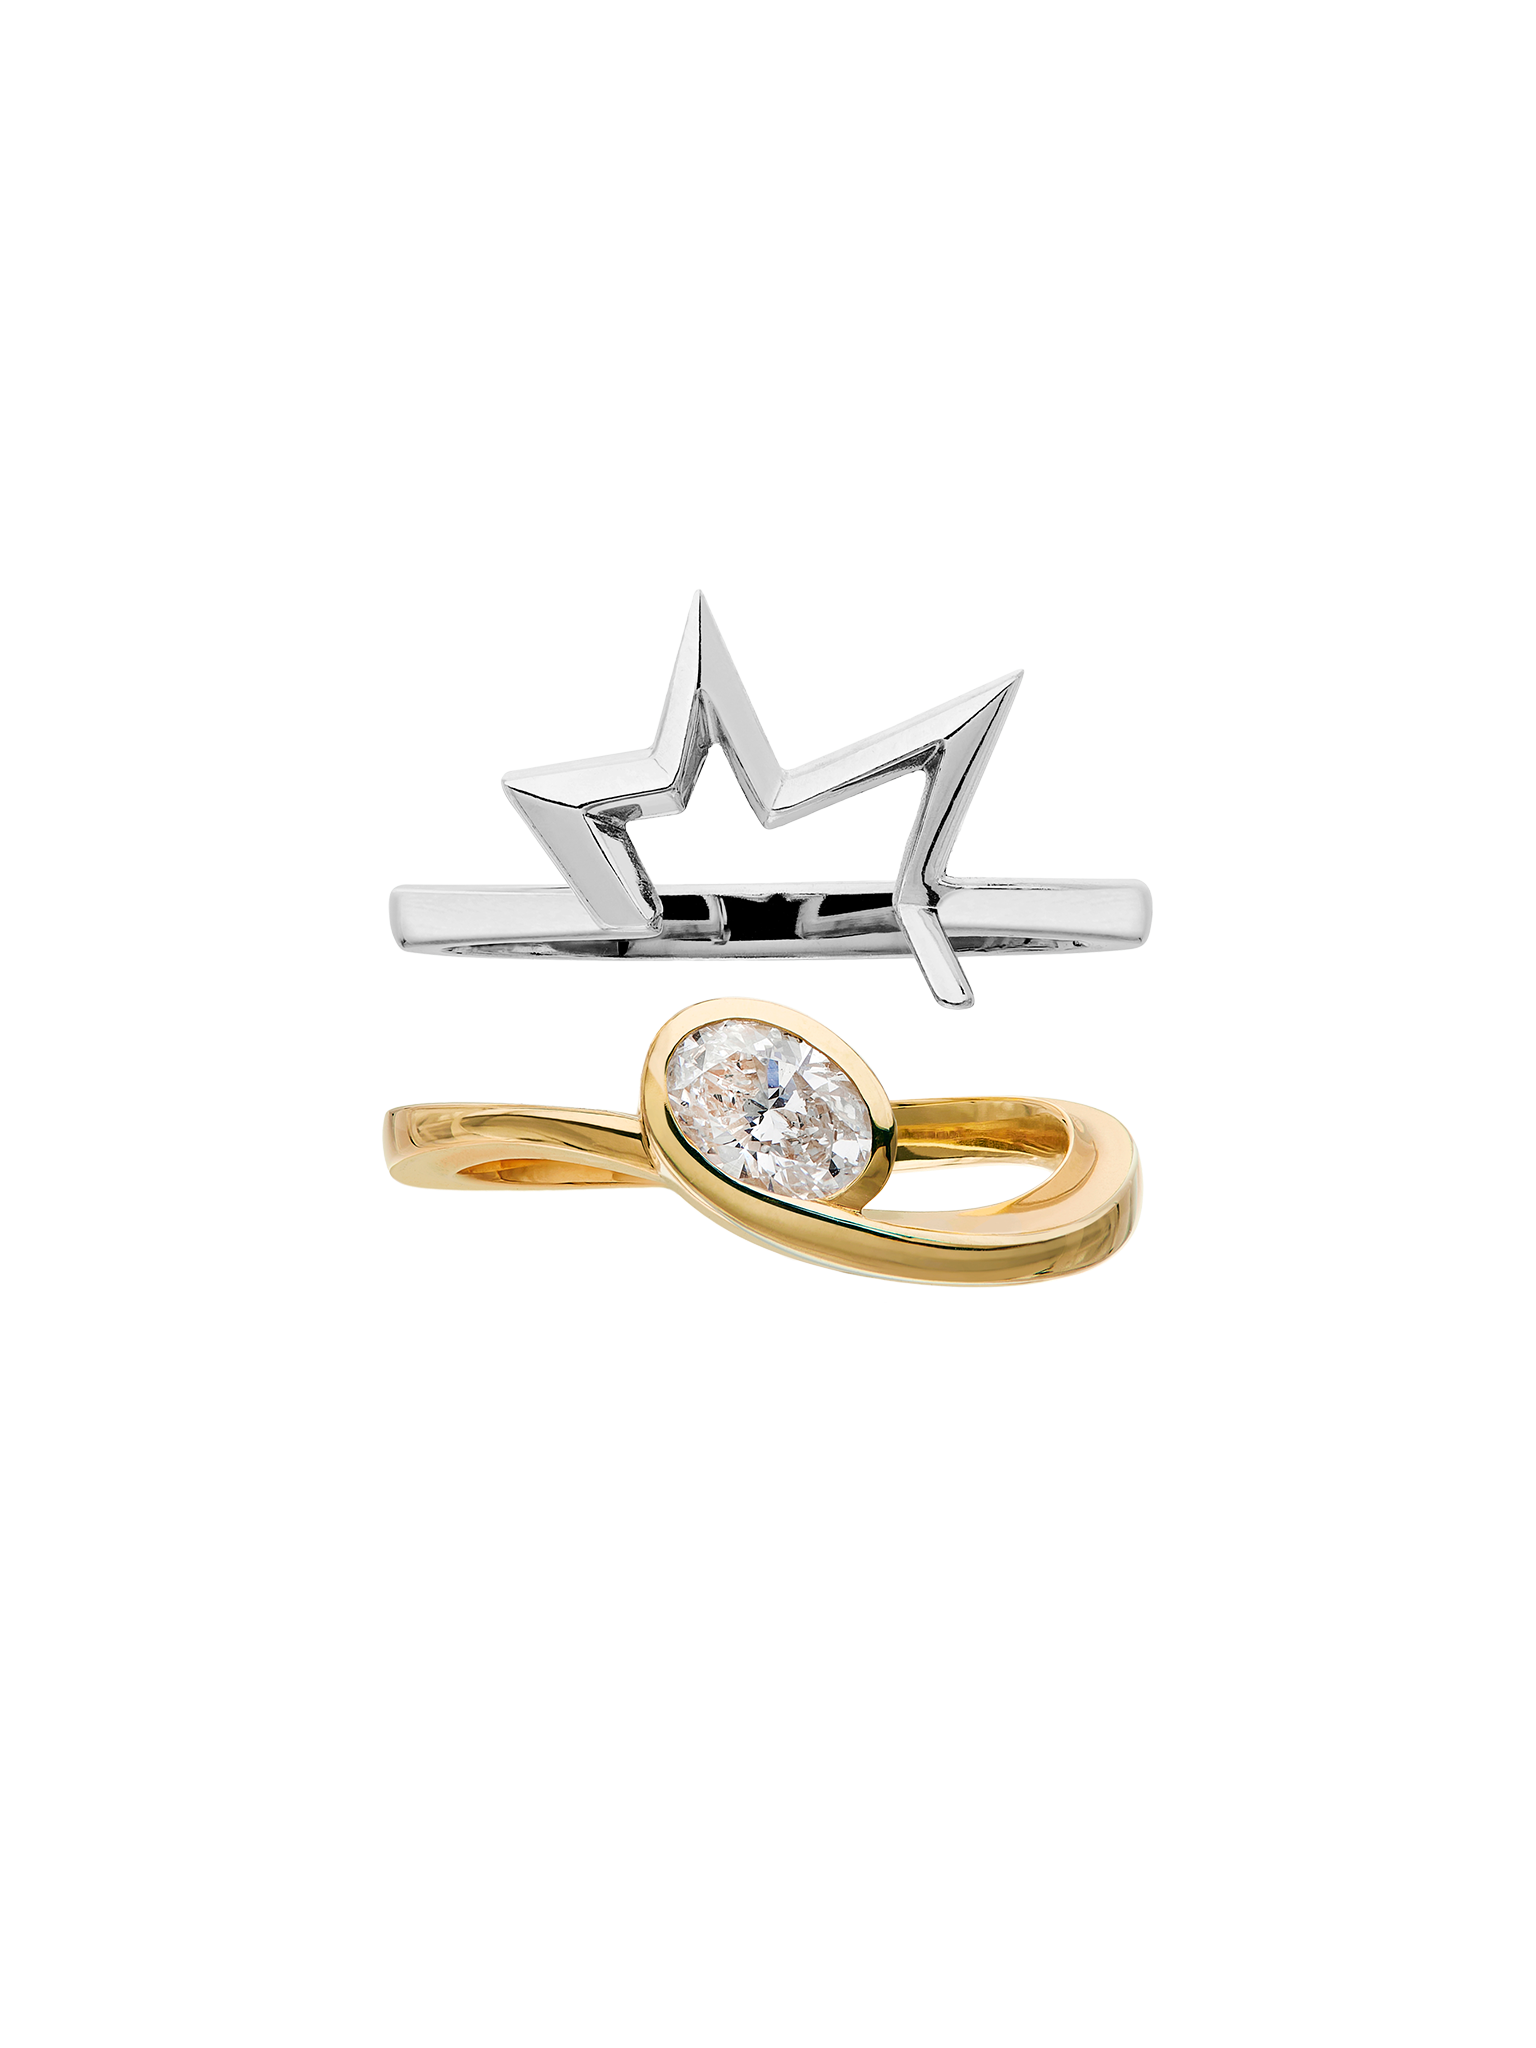 Tula solitaire engagement ring and titanium salute band